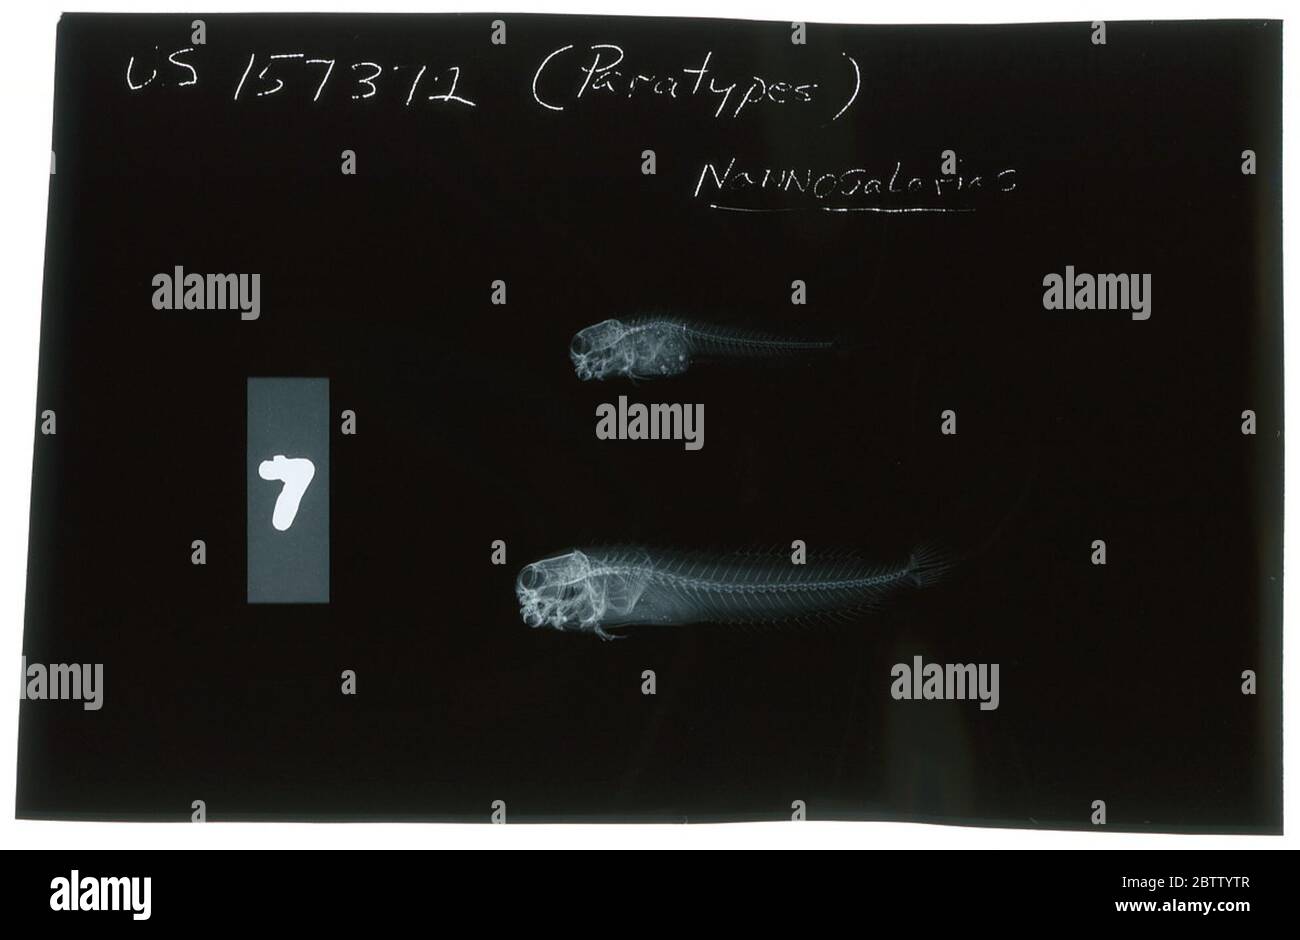 Blennius nativitatus Regan. Radiograph is of a paralectotype; The Smithsonian NMNH Division of Fishes uses the convention of maintaining the original species name for type specimens designated at the time of description. The currently accepted name for this species is Nannosalarias nativitatis.24 Oct 20181 Stock Photo